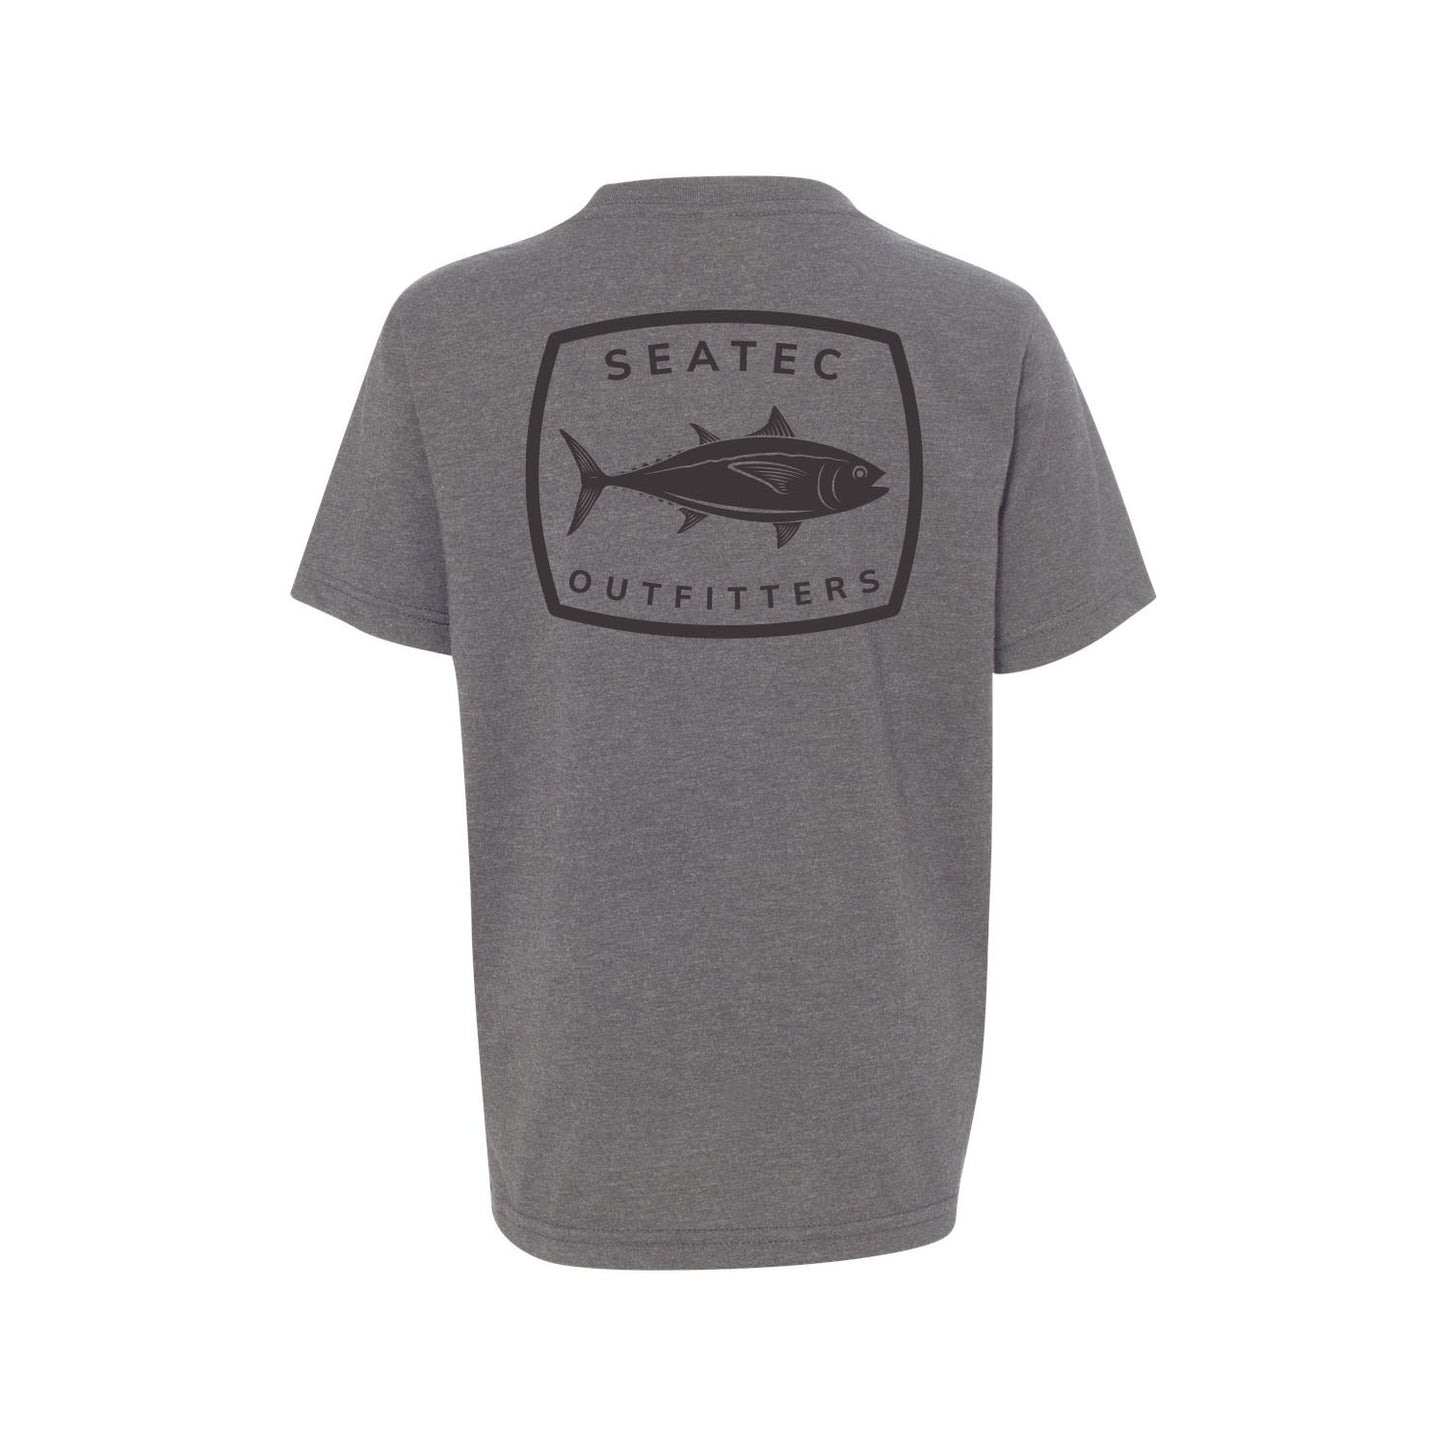 Seatec Outfitters Tuna Boy's Short Sleeve T-Shirt L